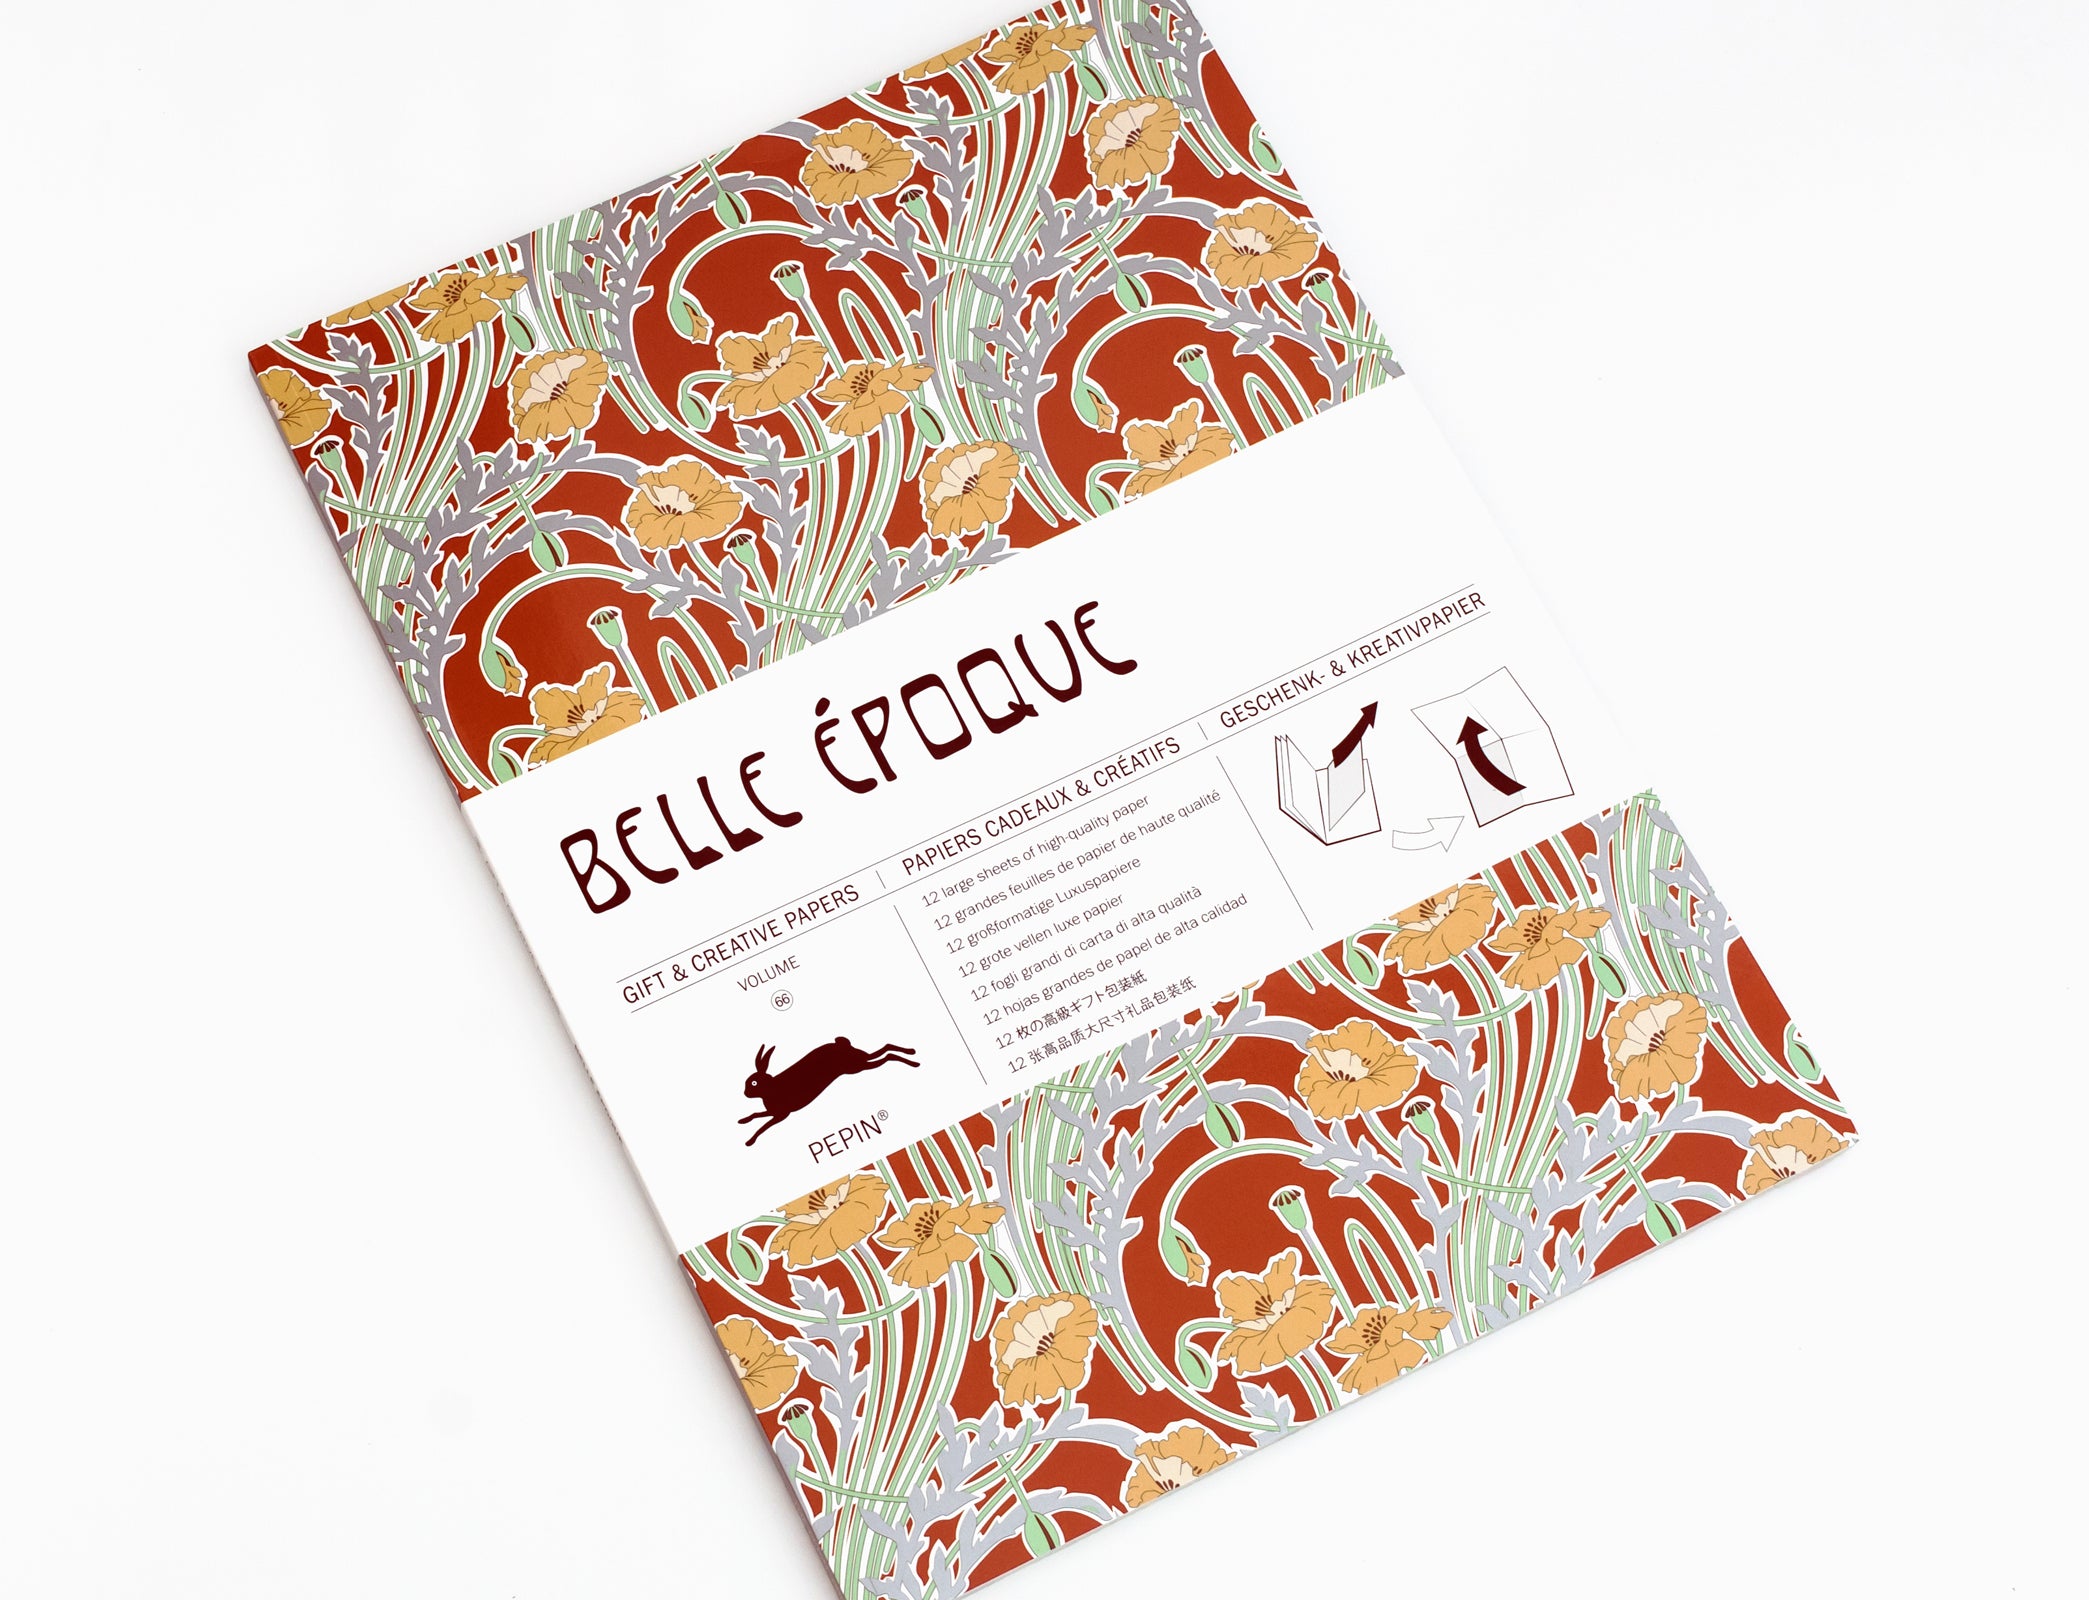 Gift & creative papers - Belle Epoque